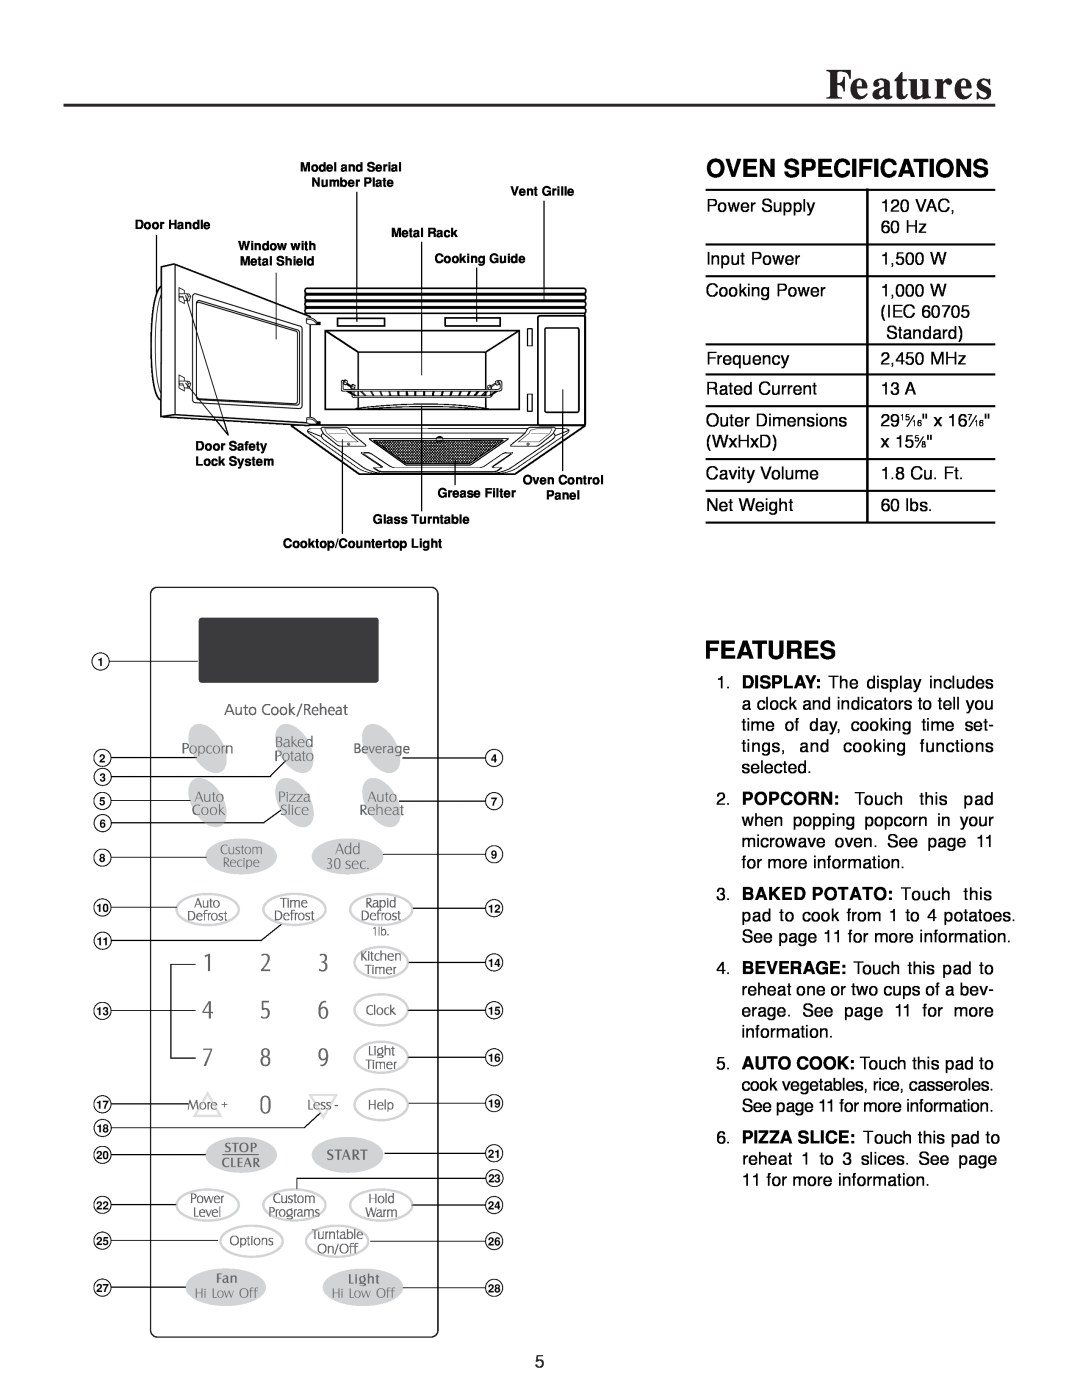 Maytag MMV4184AA owner manual Features, Oven Specifications 